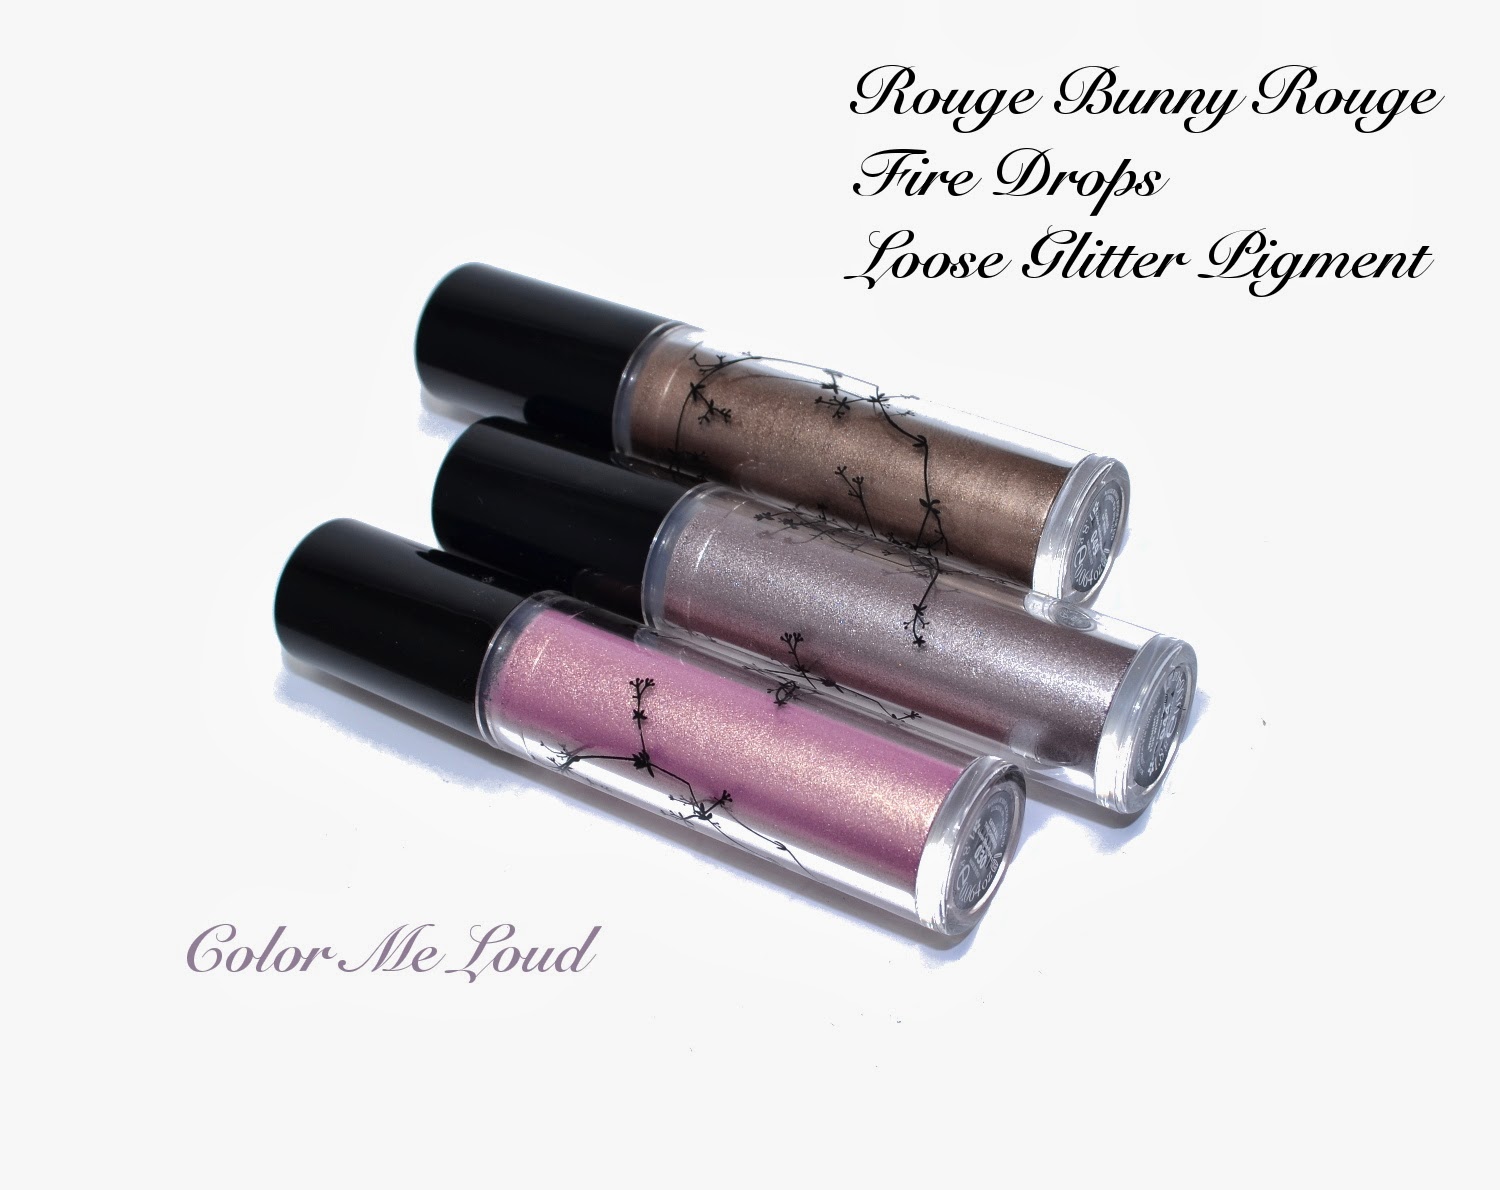 Rouge Bunny Rouge Fire Drops Loose Glitter Pigments in Eaten all the Cherries, Wishing for Wings, Caress of Mink, Silk Aether Long Lasting Cream Eye Shadow in Chiffon Ringlet, Review, Swatches & FOTD